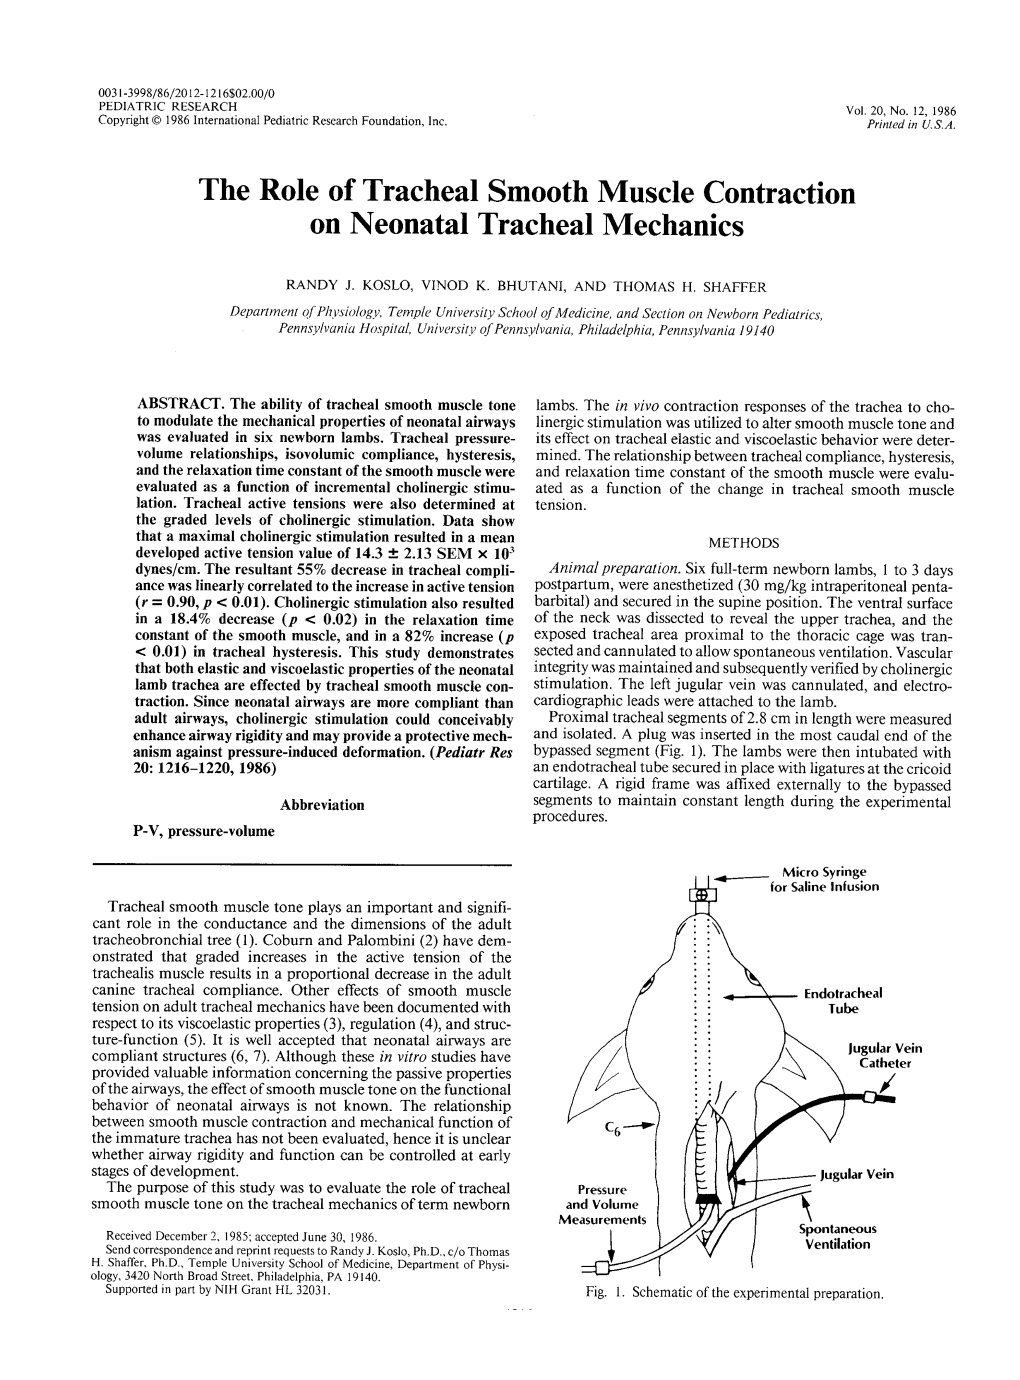 The Role of Tracheal Smooth Muscle Contraction on Neonatal Tracheal Mechanics